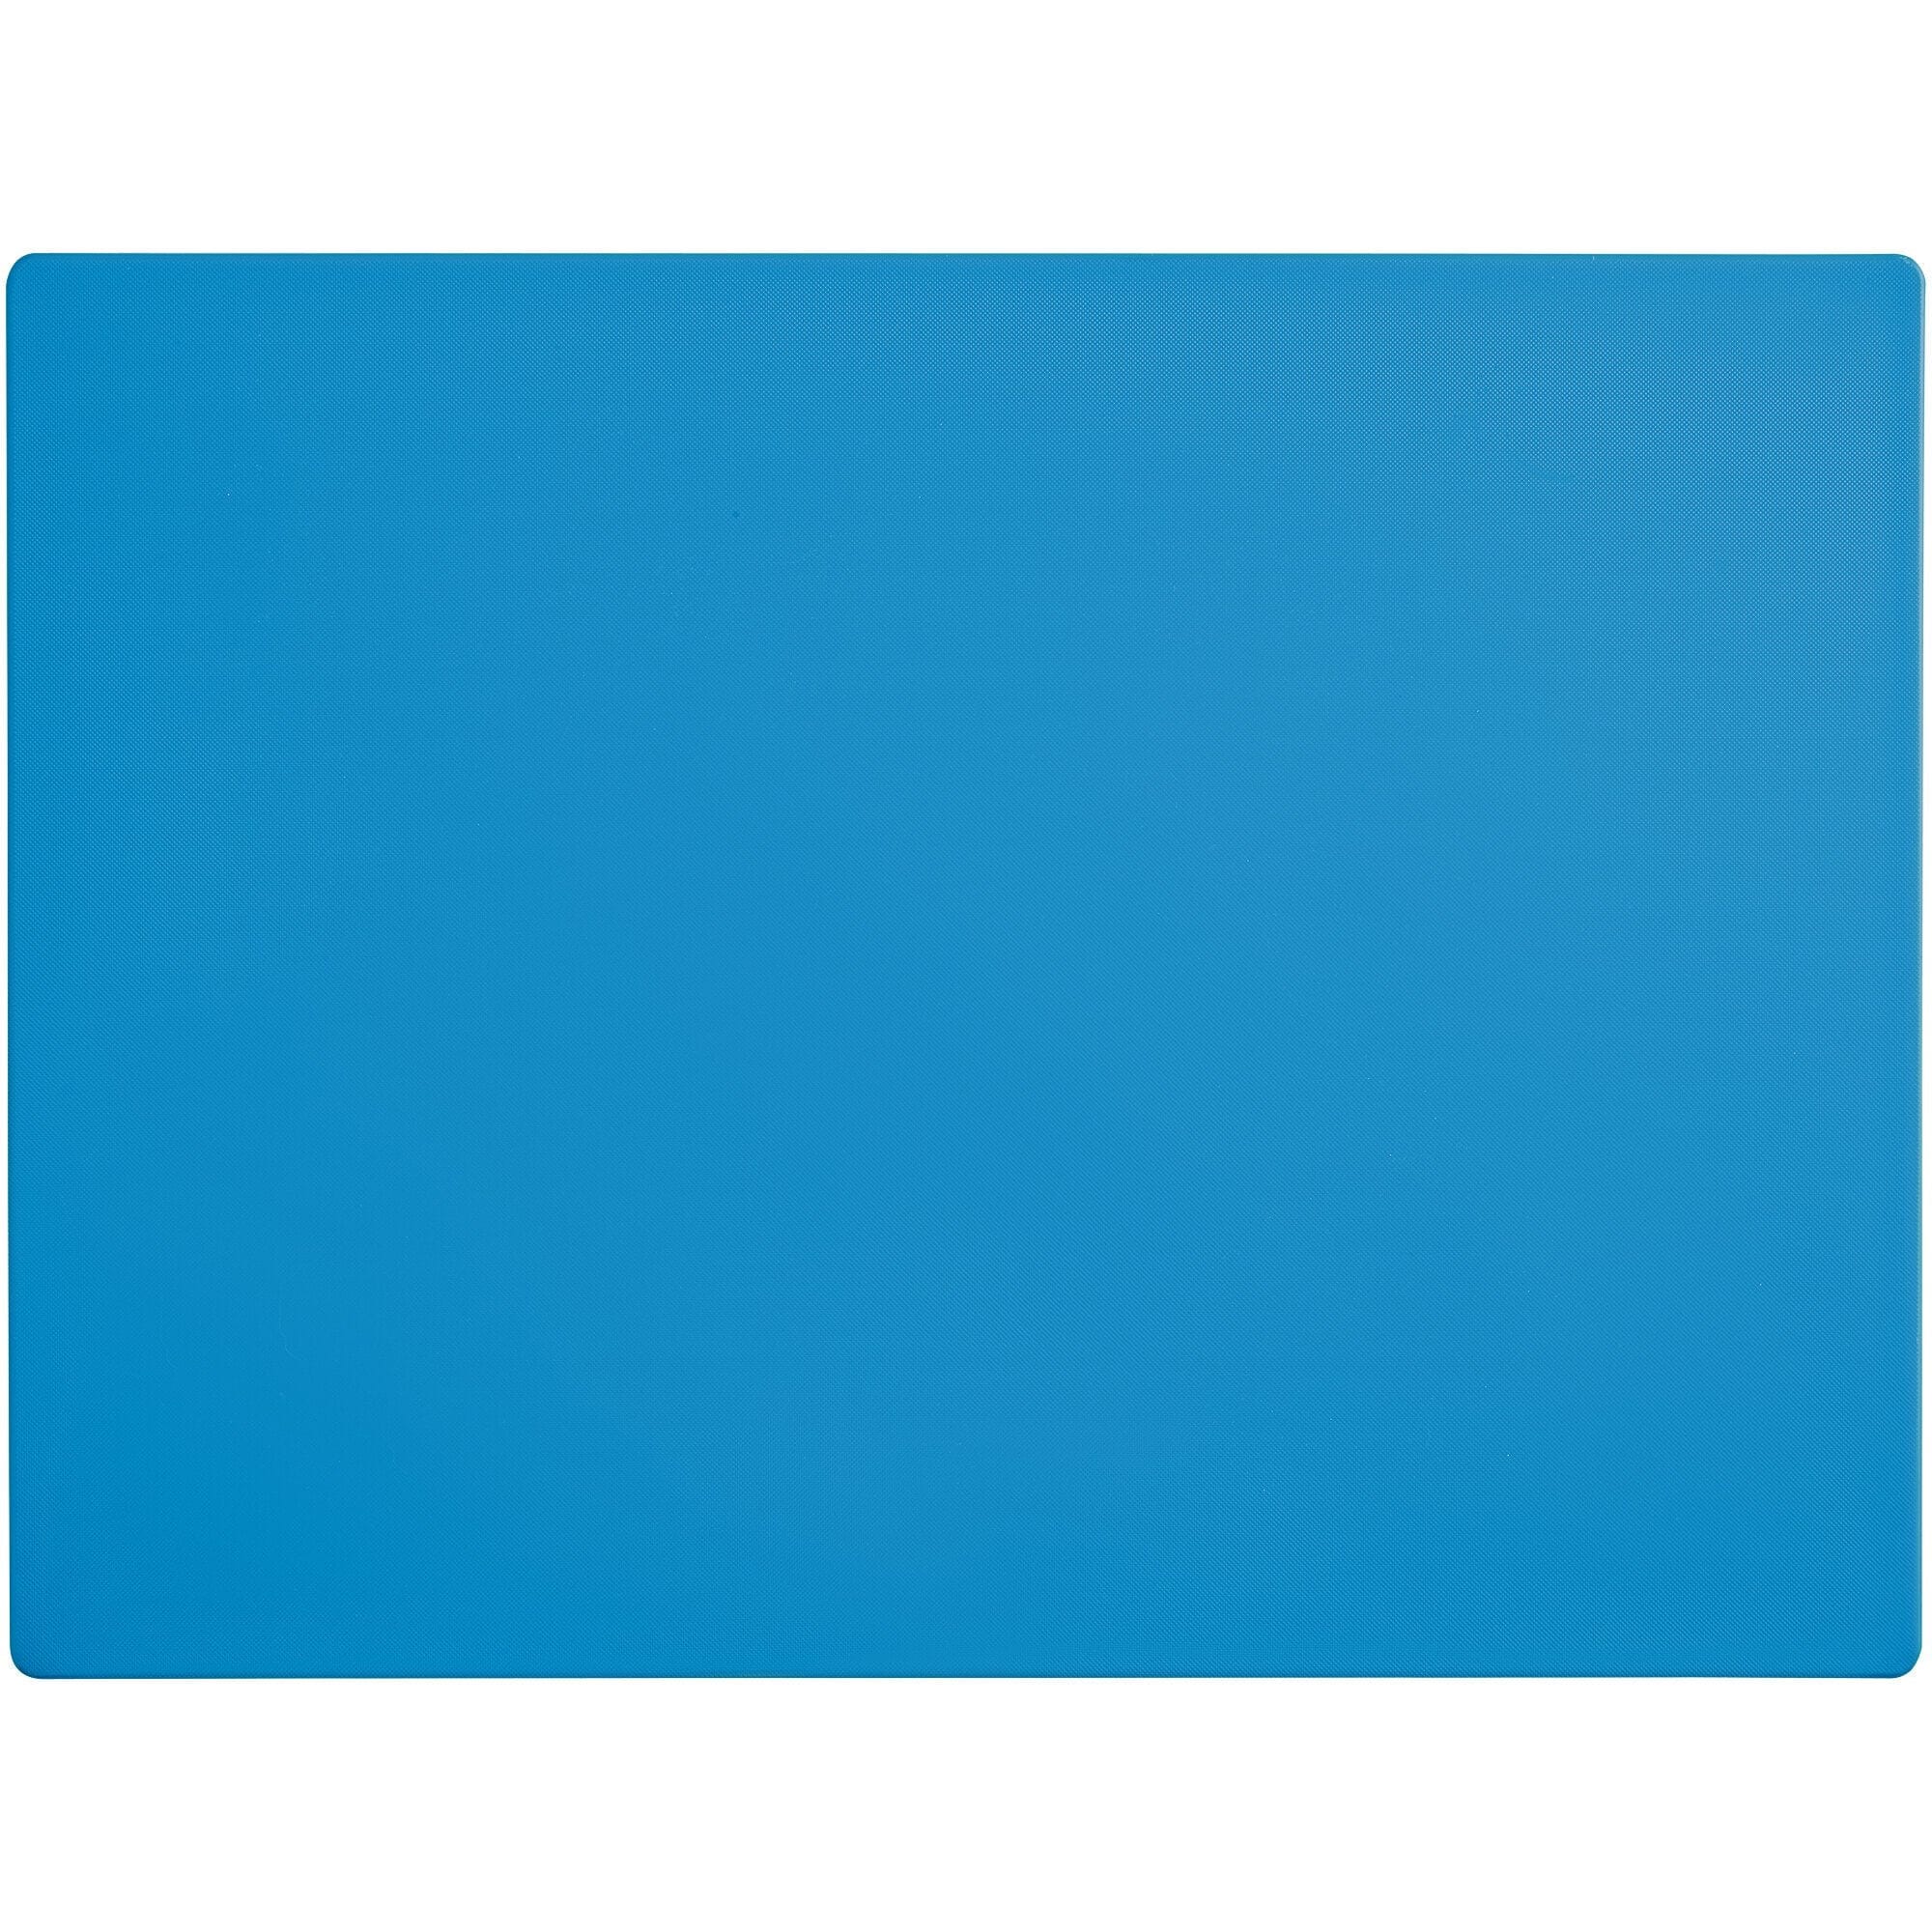 Update International CBBL-1824 Blue 18inch x 24 inch Cutting Board  The material guarantees maximum sanitation, resisting cut-grooving, which could potentially absorb juice, bacteria, or odor, without compromising your blade's sharpness  -CBBL-1824